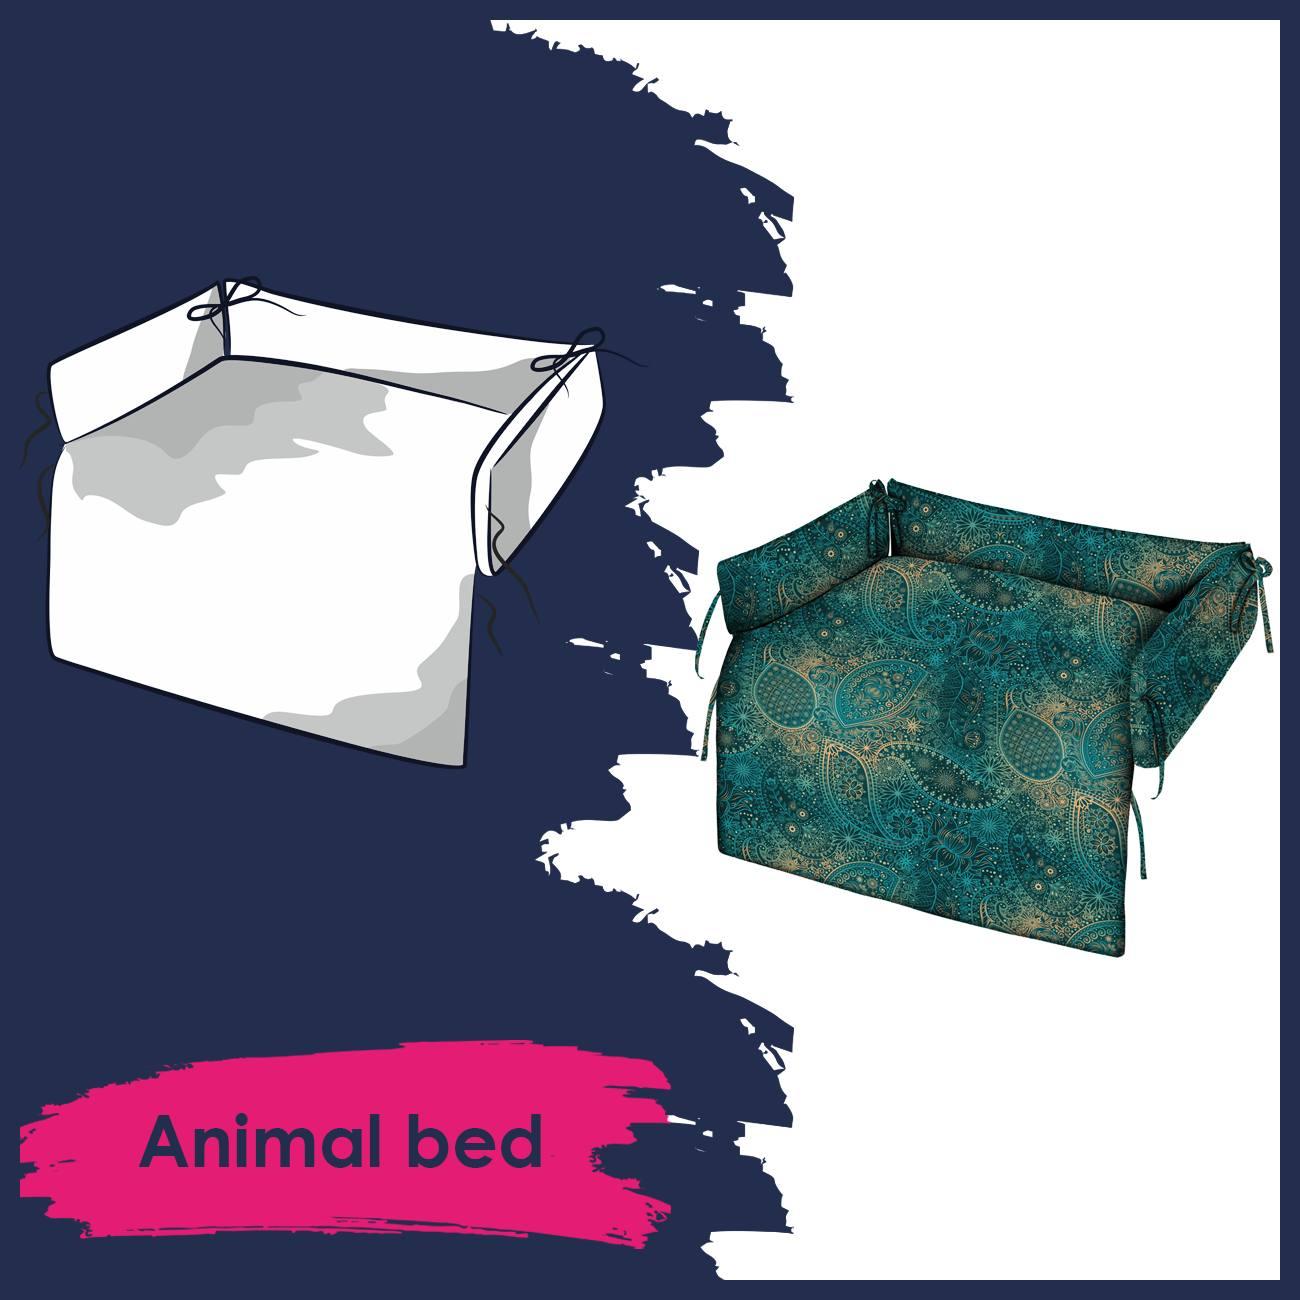 Animal bed